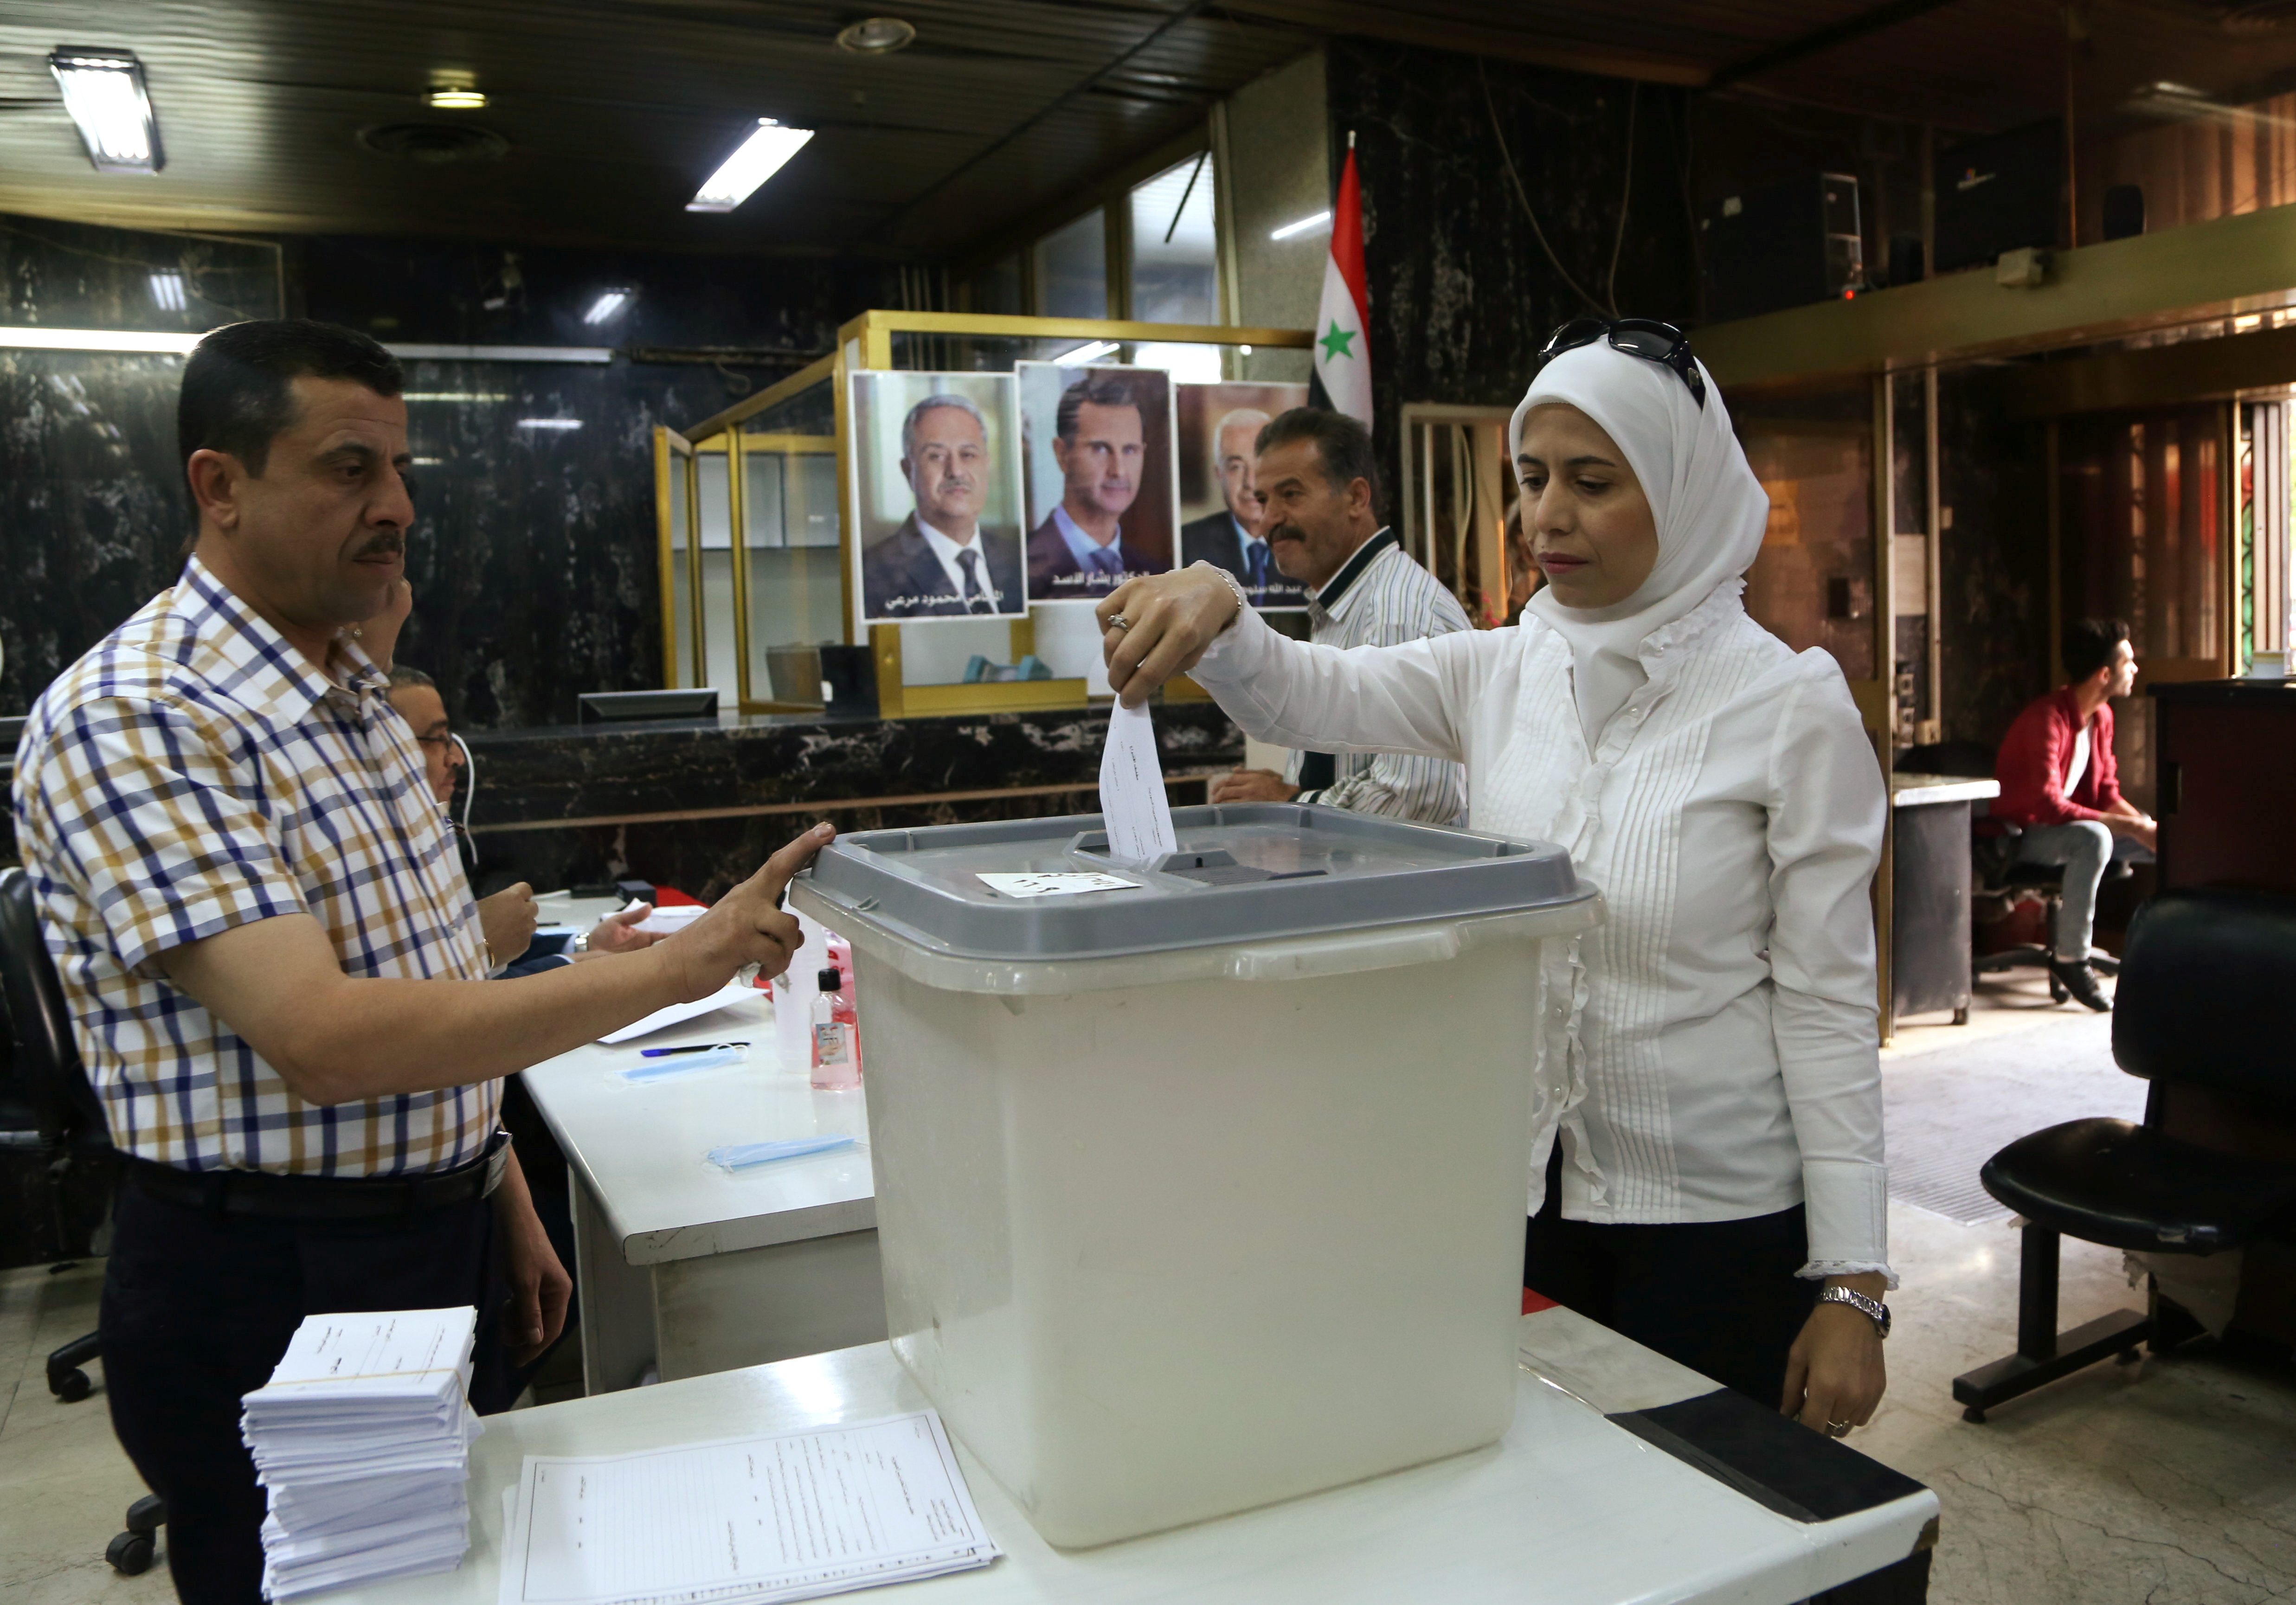 Syrians go to the polls in election that Assad is set to win